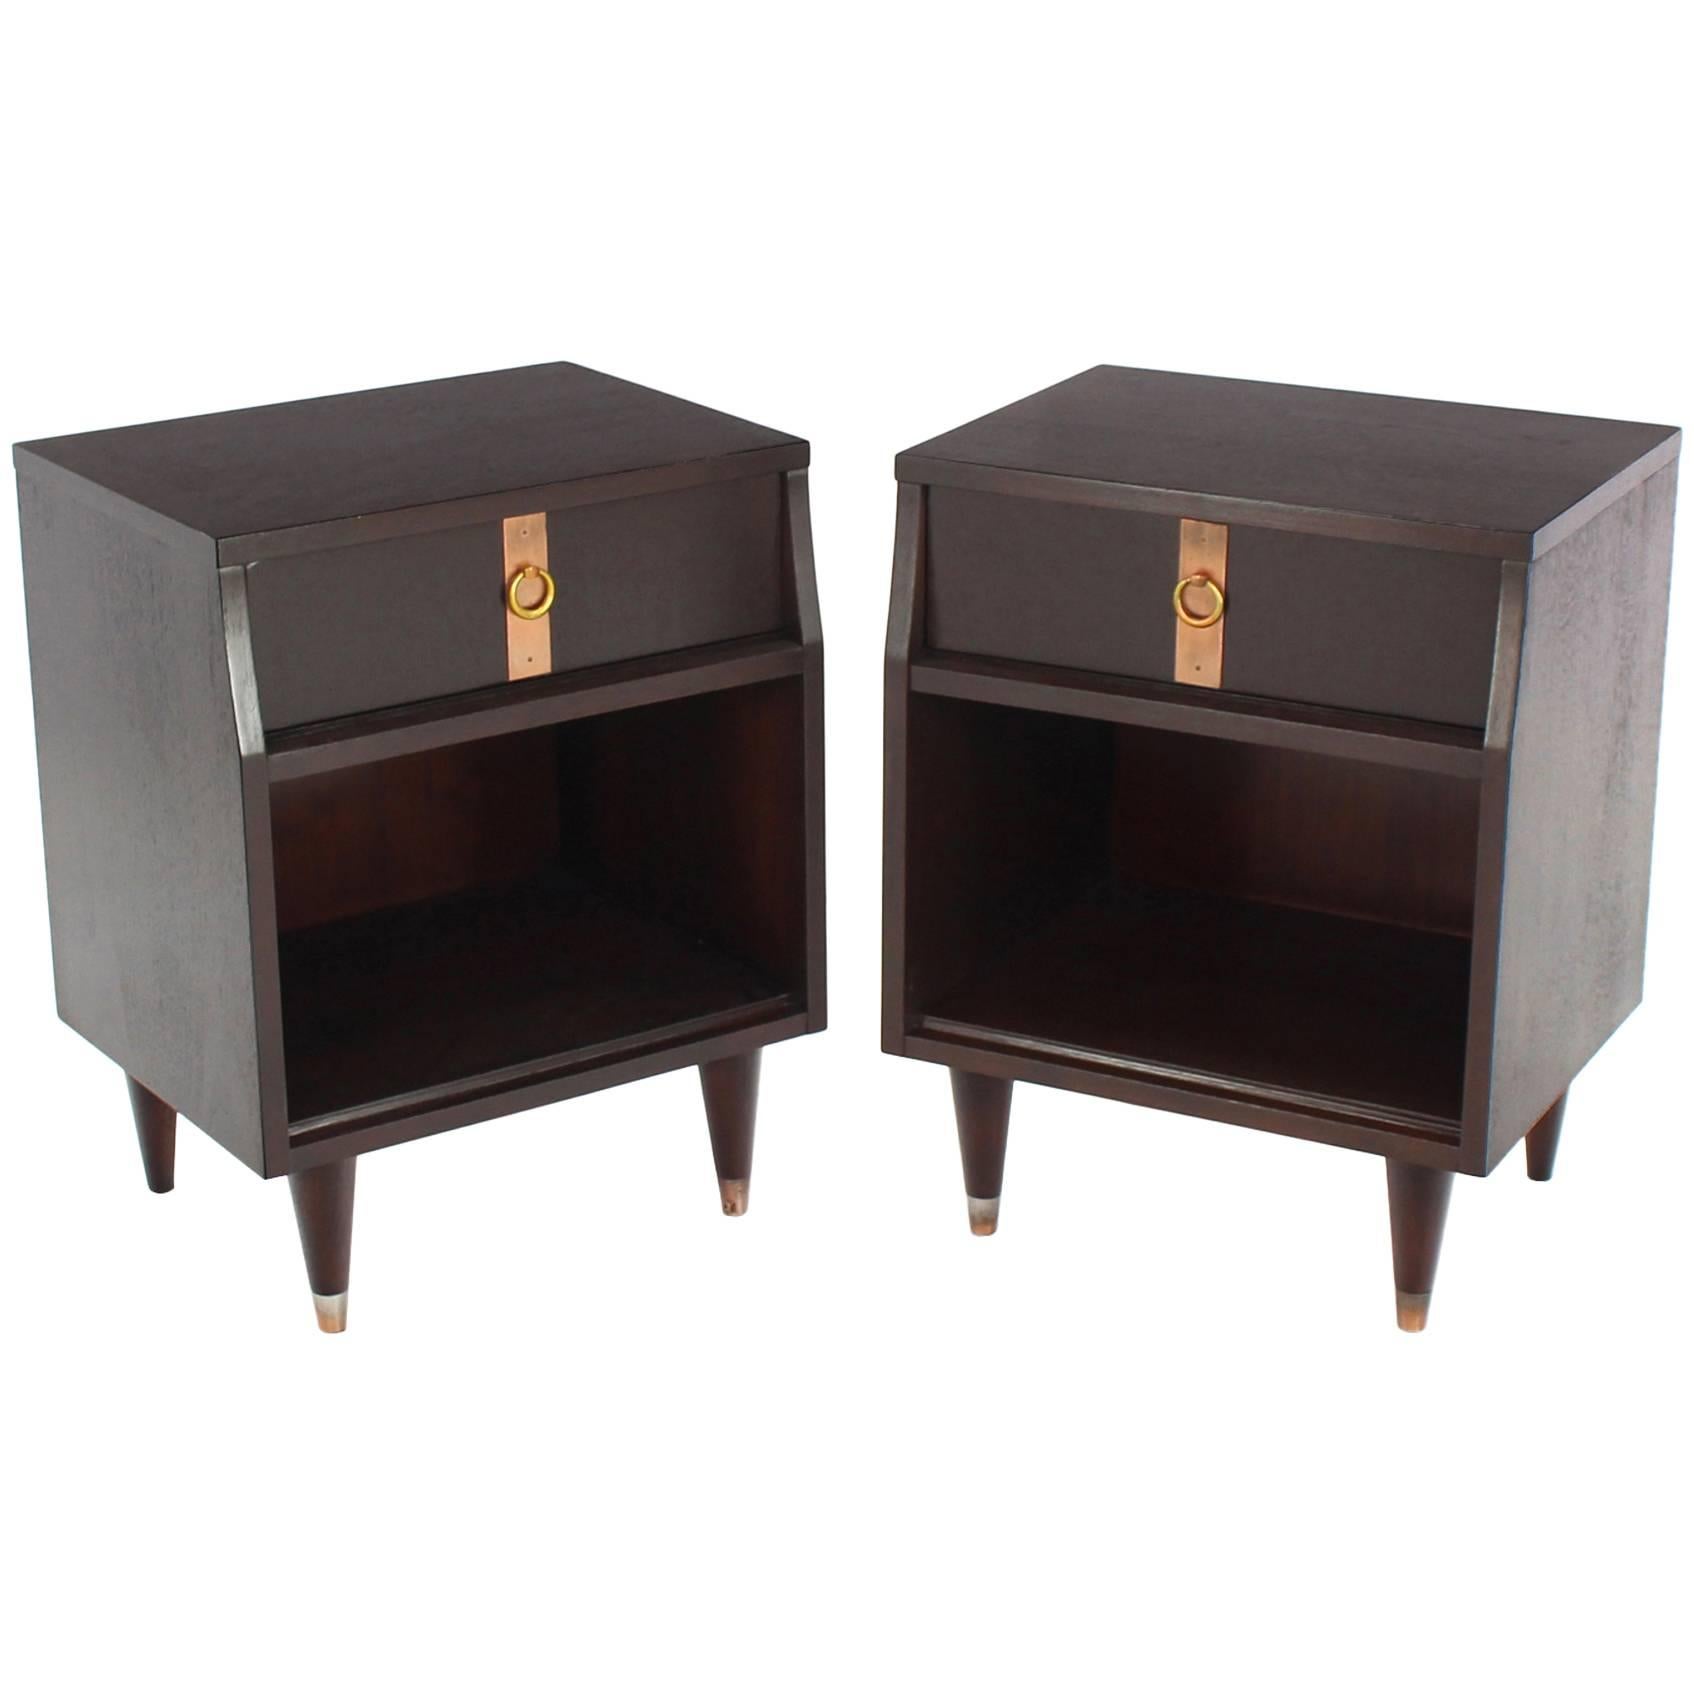 Pair of Ebonized Mid Century Modern Nightstands For Sale